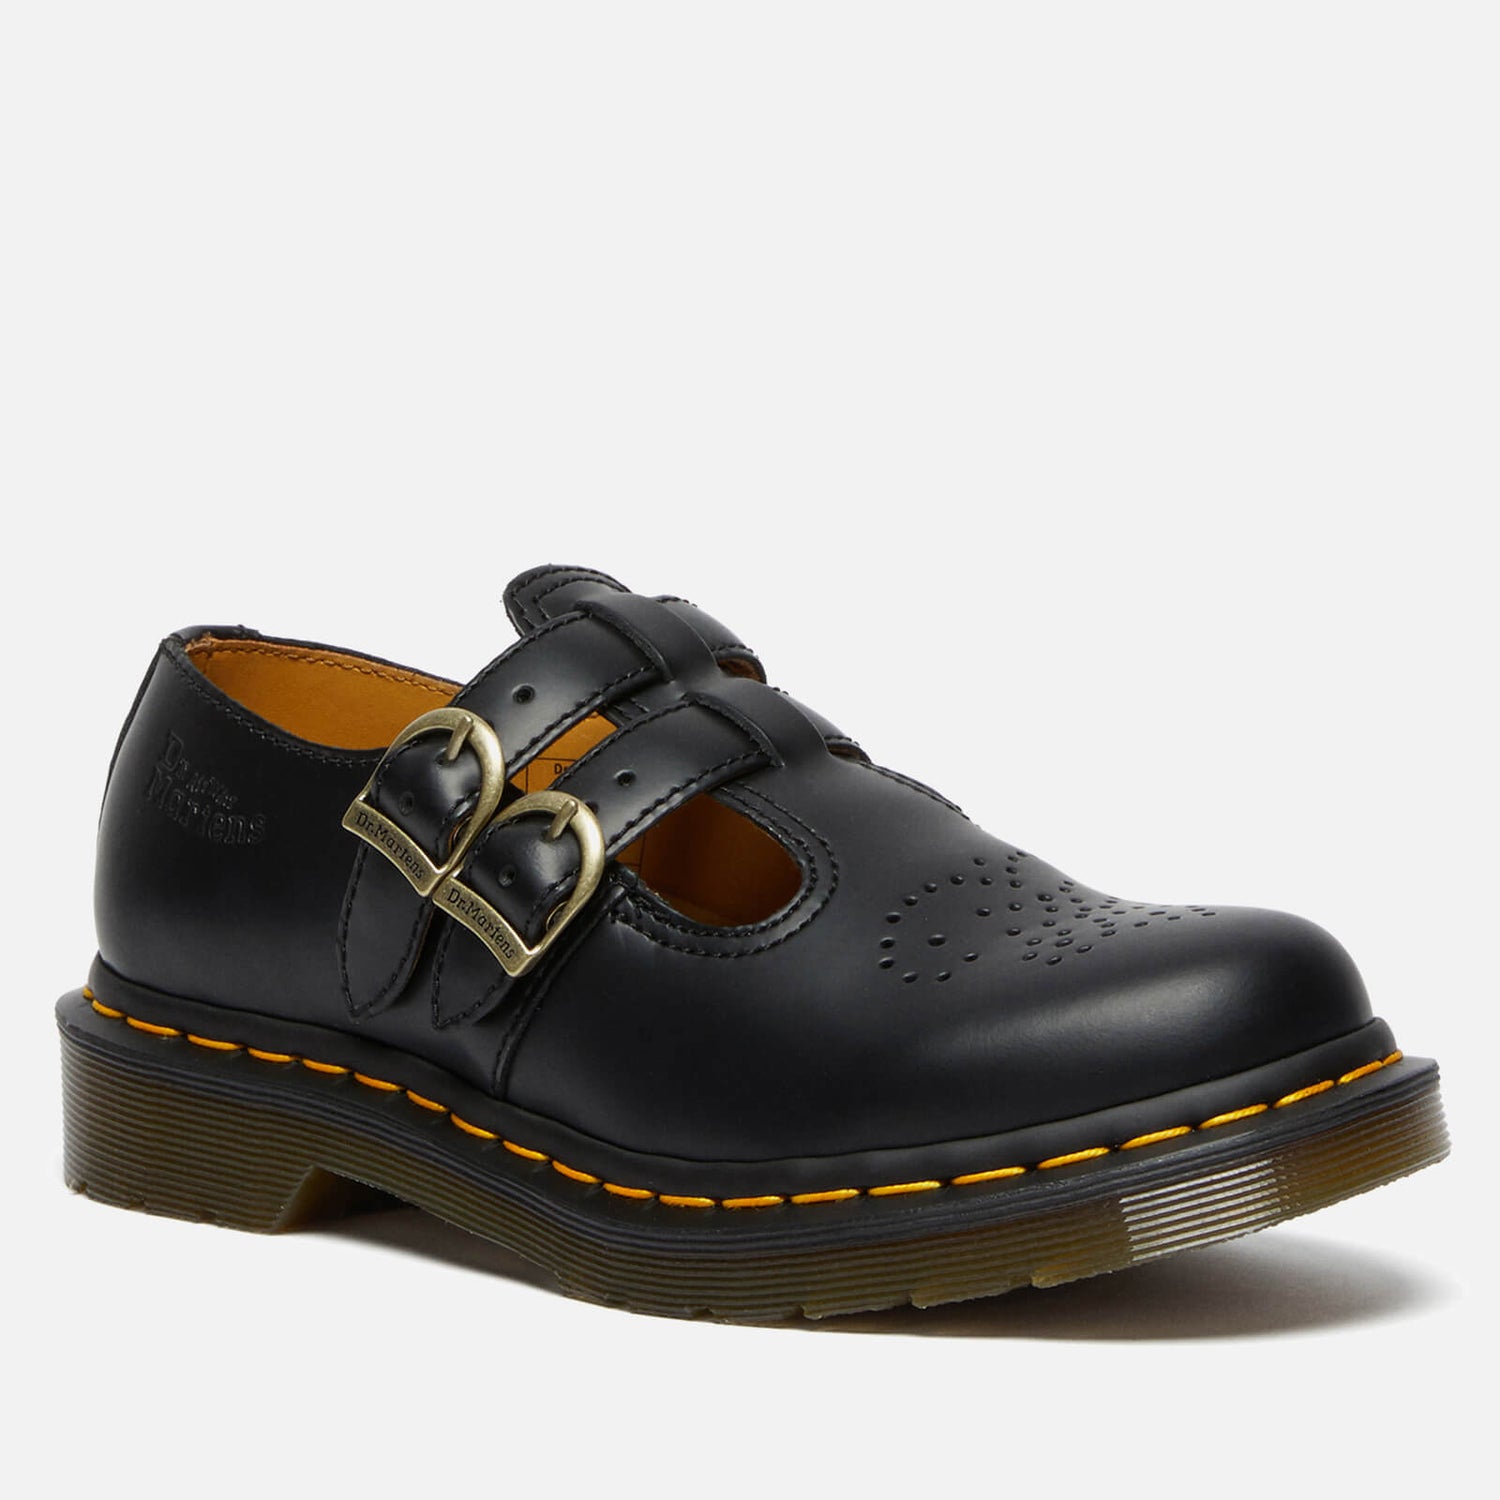 Dr. Martens Women's 8065 Leather Mary-Jane Shoes - UK 3